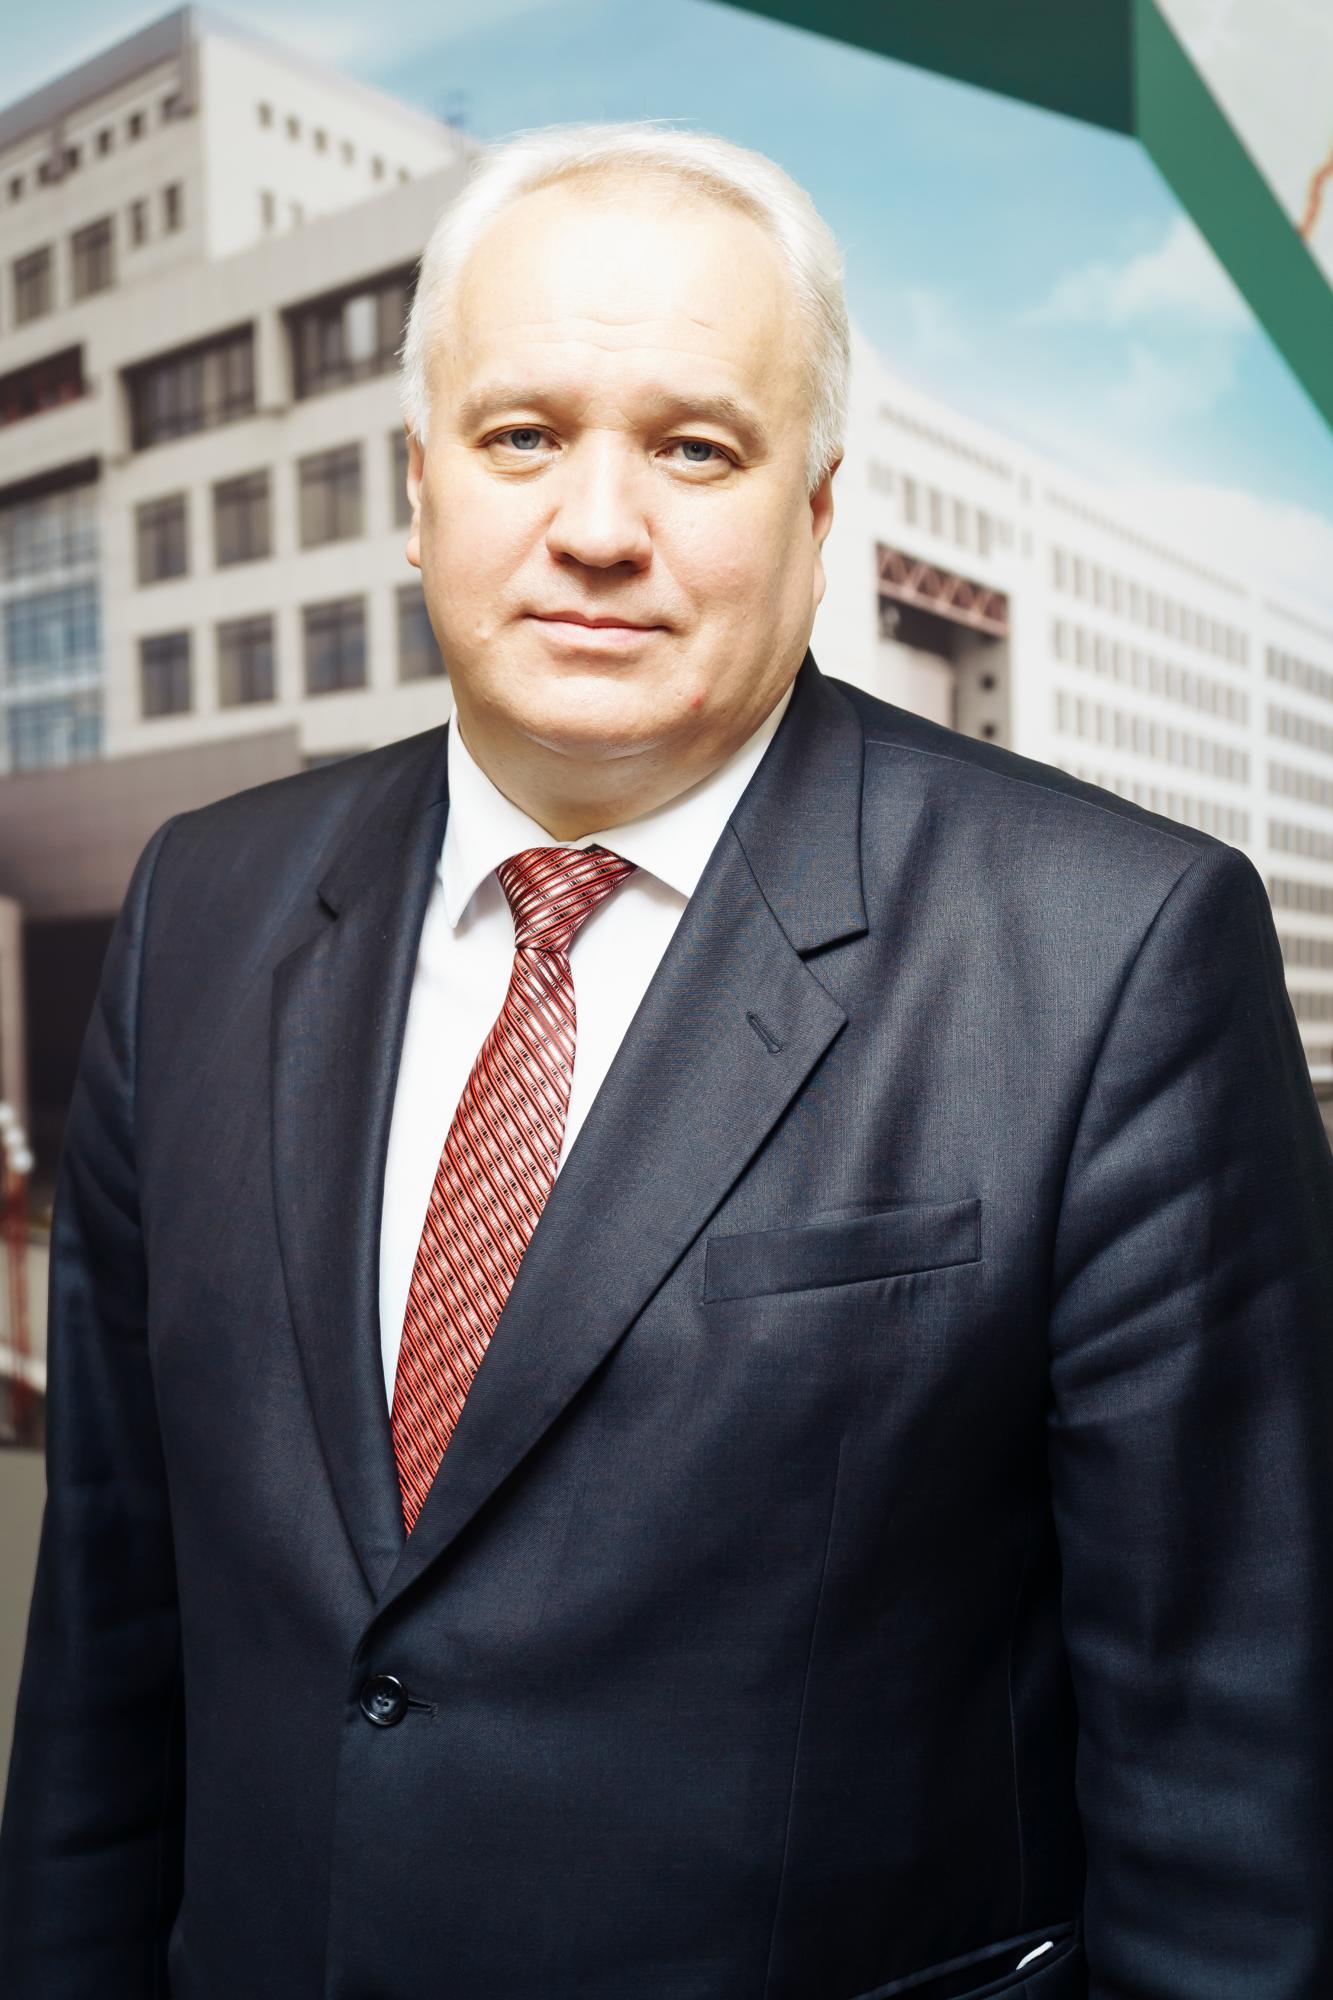 Dean of the Faculty of Railway construction